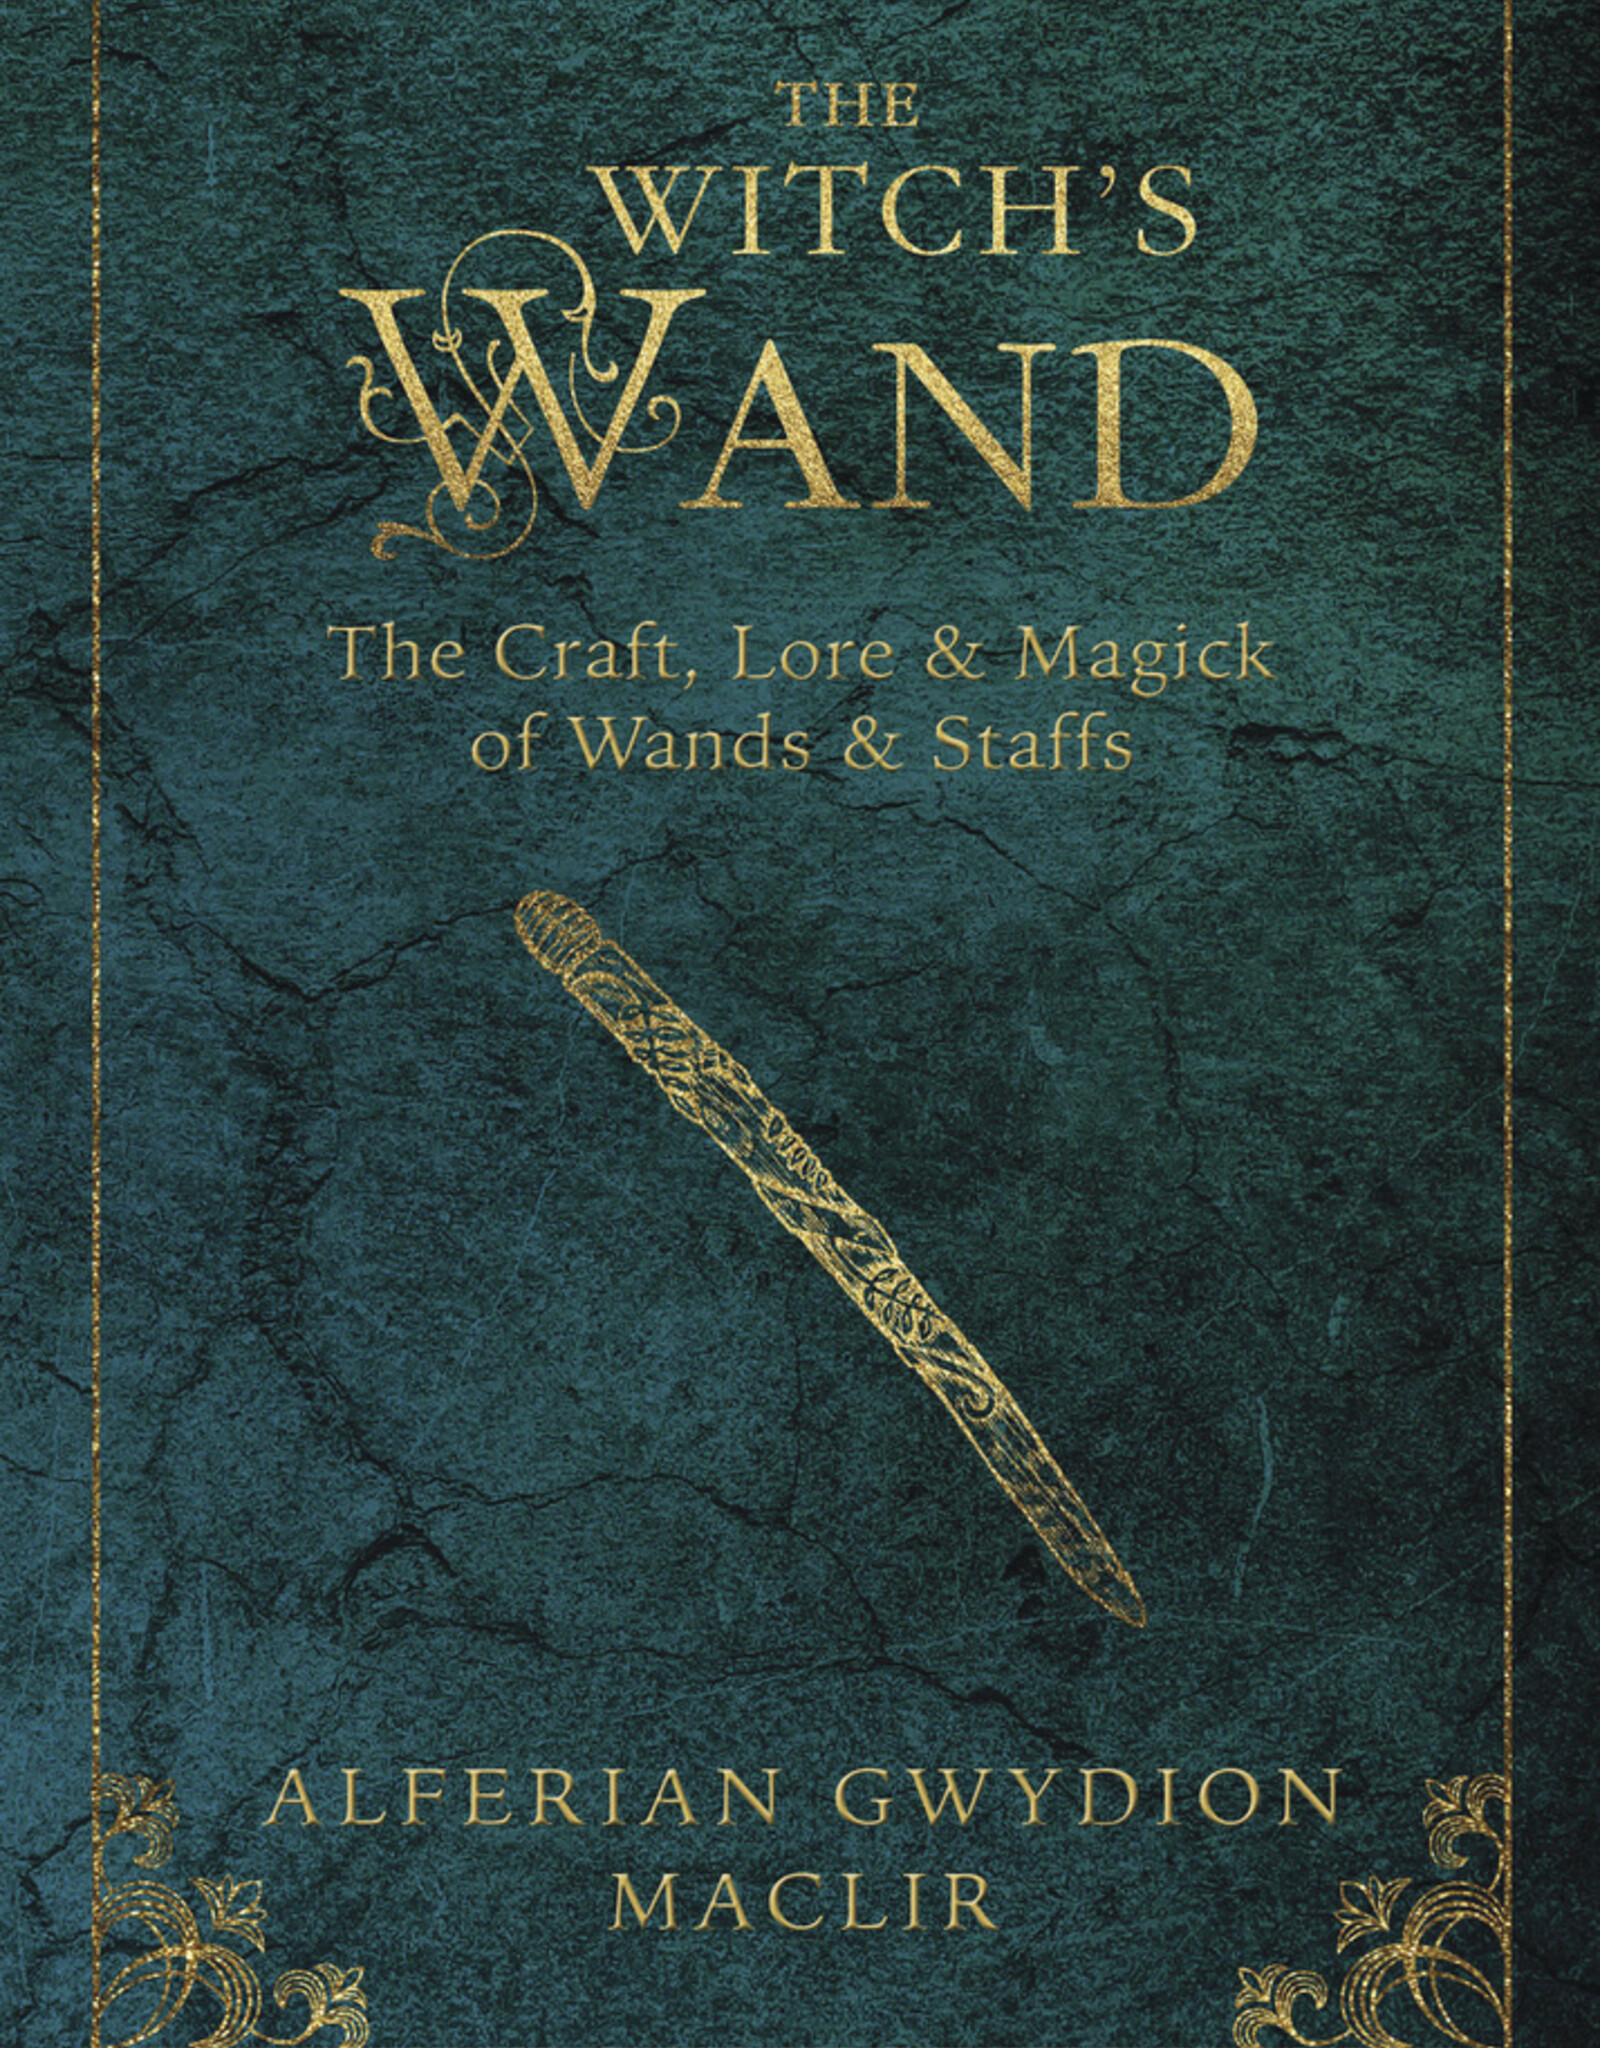 Llewelyn *The Witch's Wand